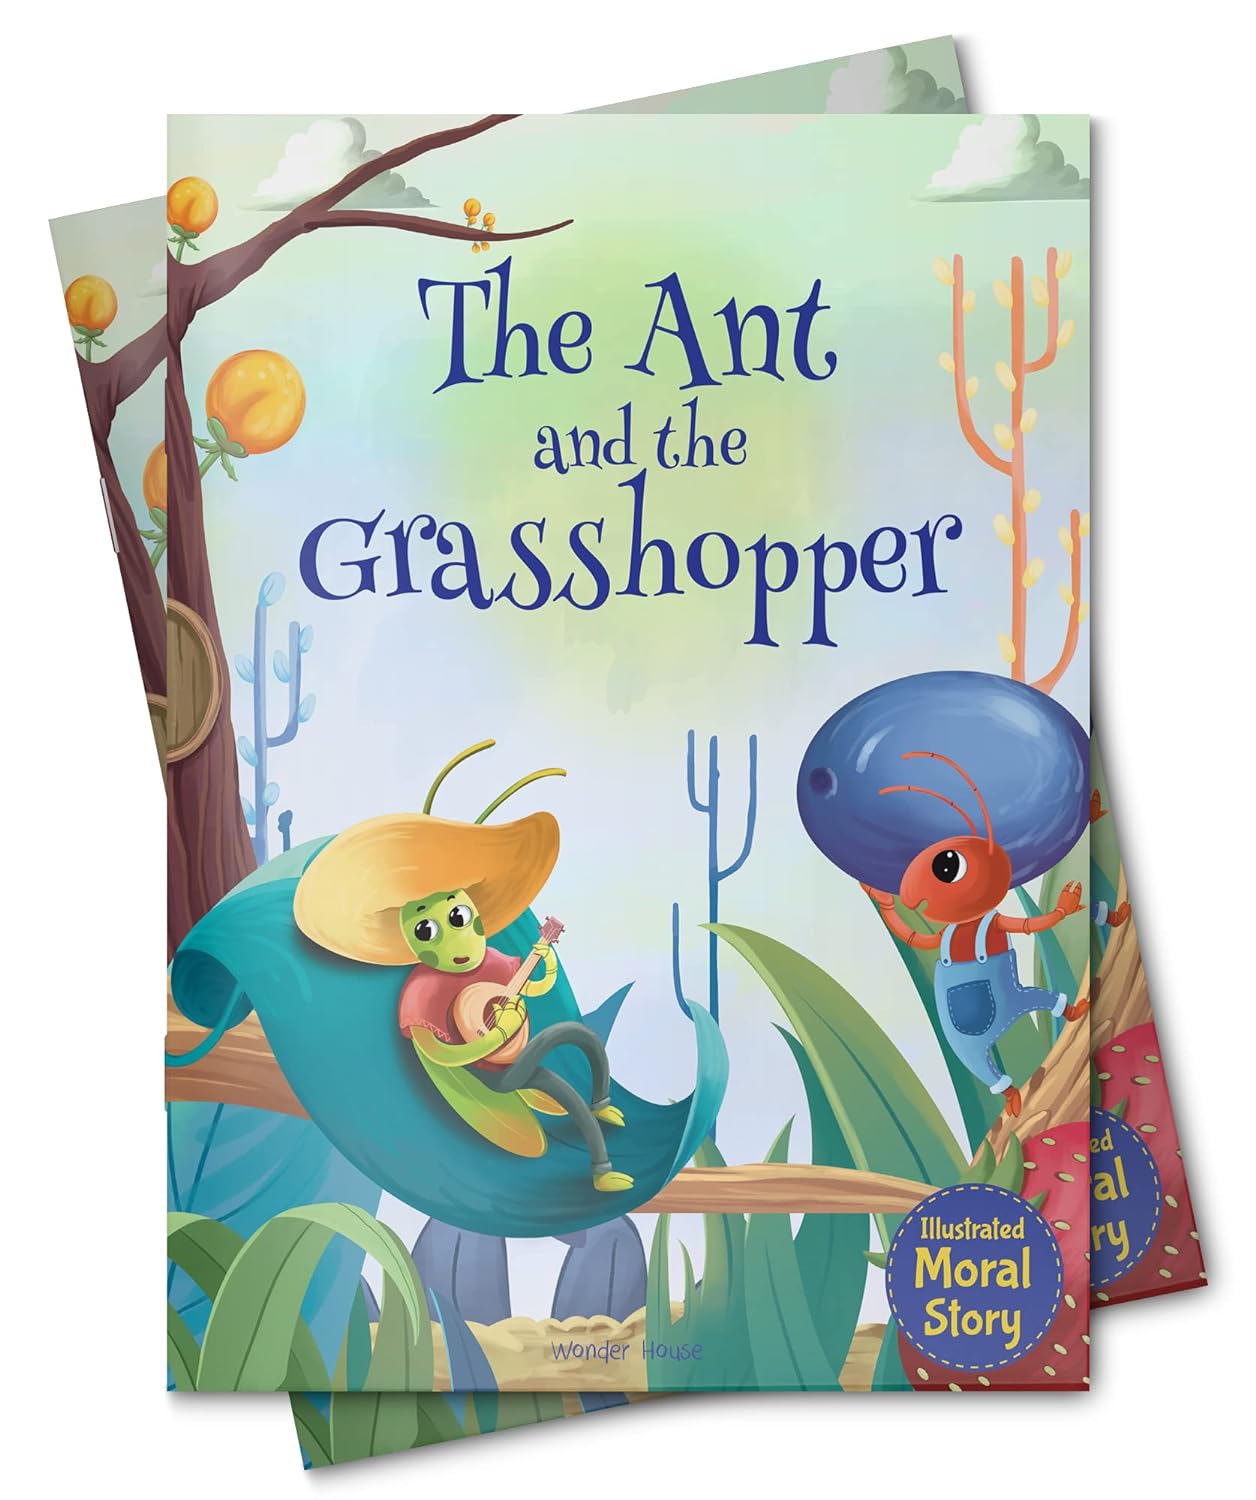 The Ant and the Grasshopper - Illustrated Moral Story for Children